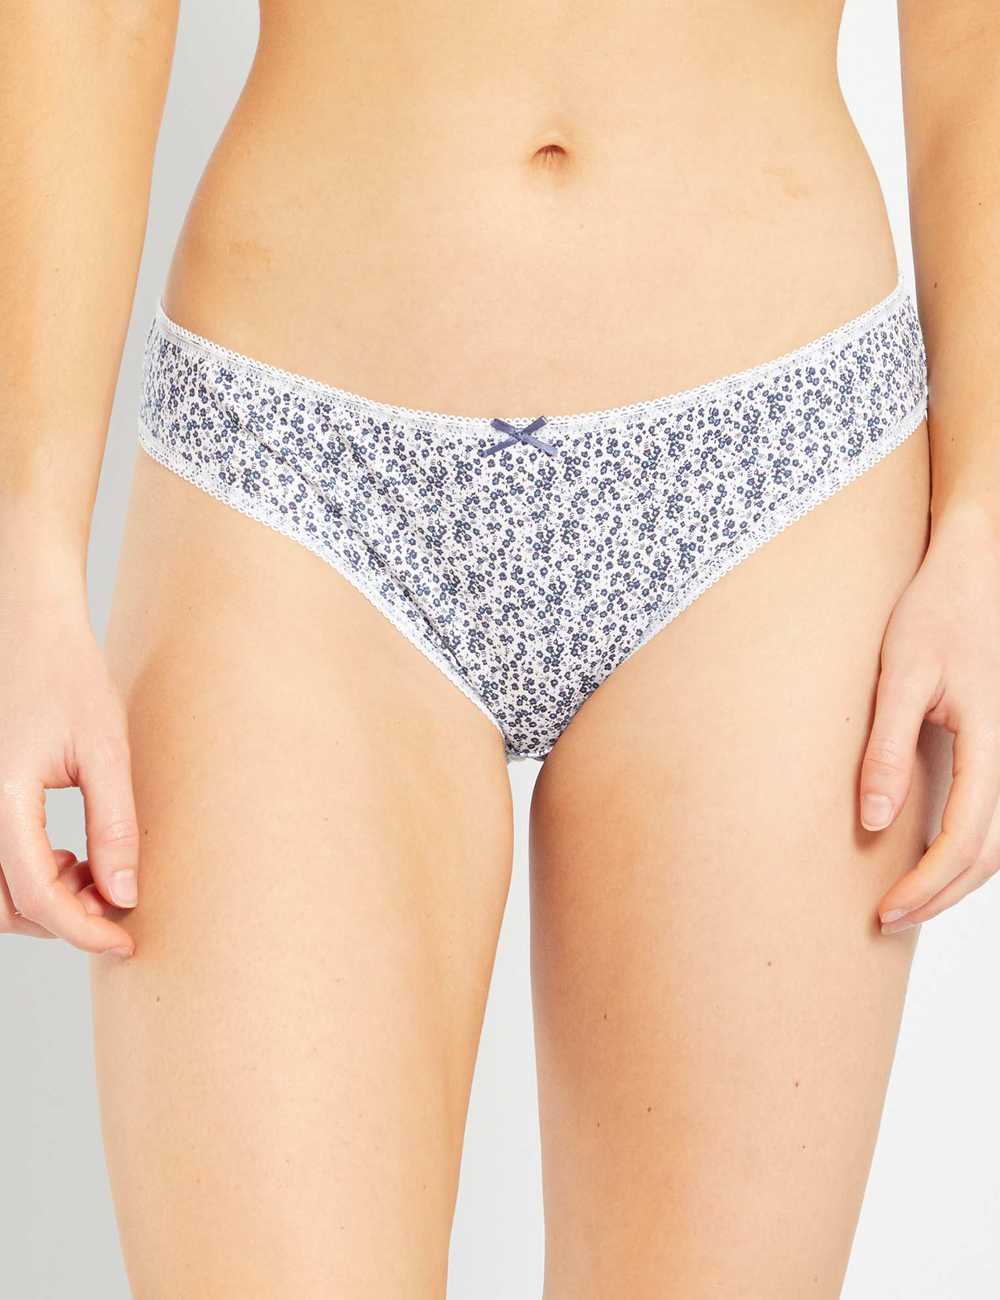 Charter Club Brief Panties for Women